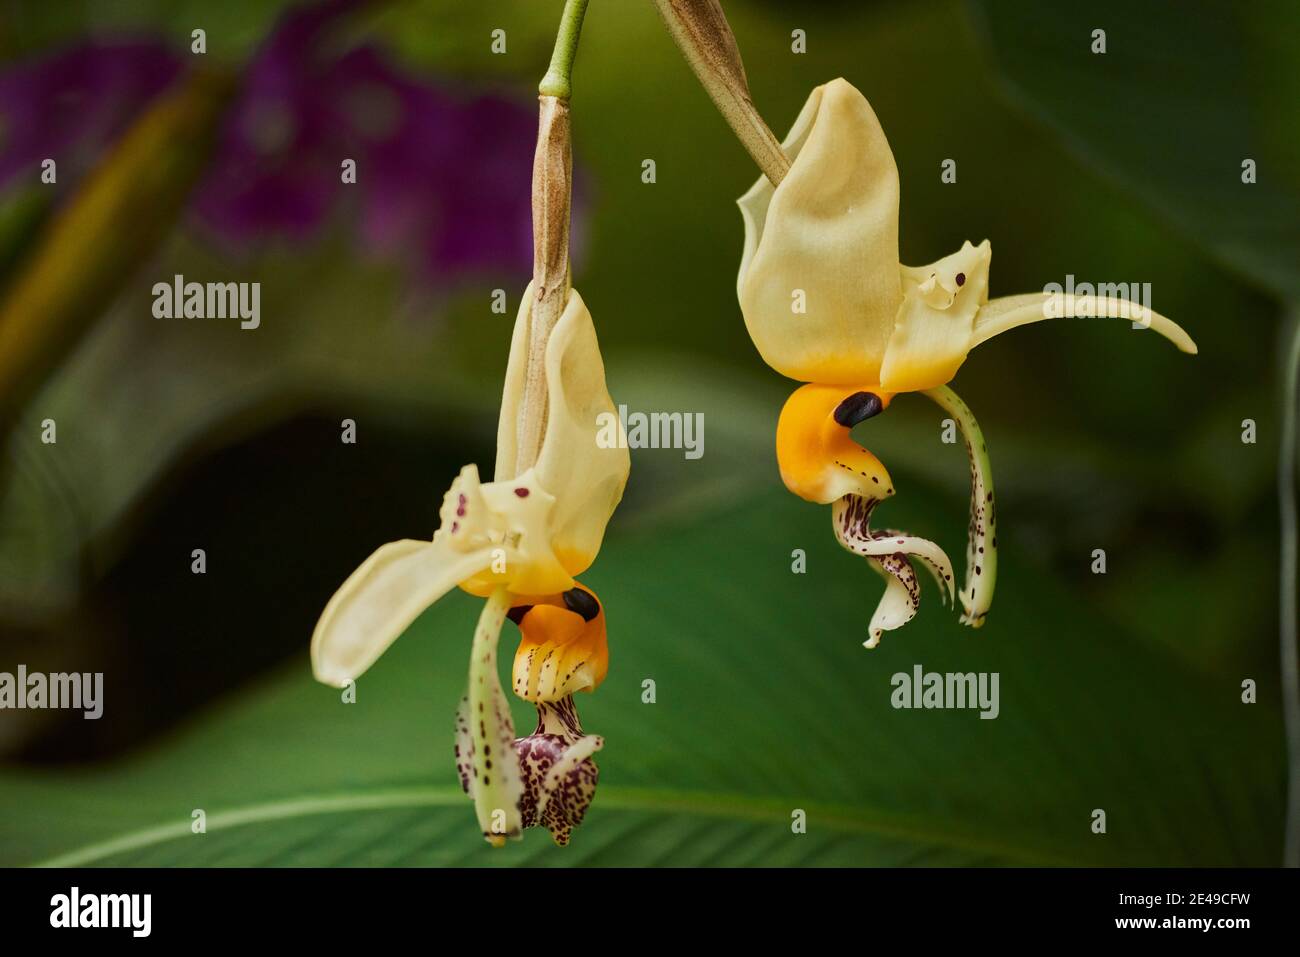 Orchid blossom, Stanhopea wardii, blossom, blooming, Germany Stock Photo